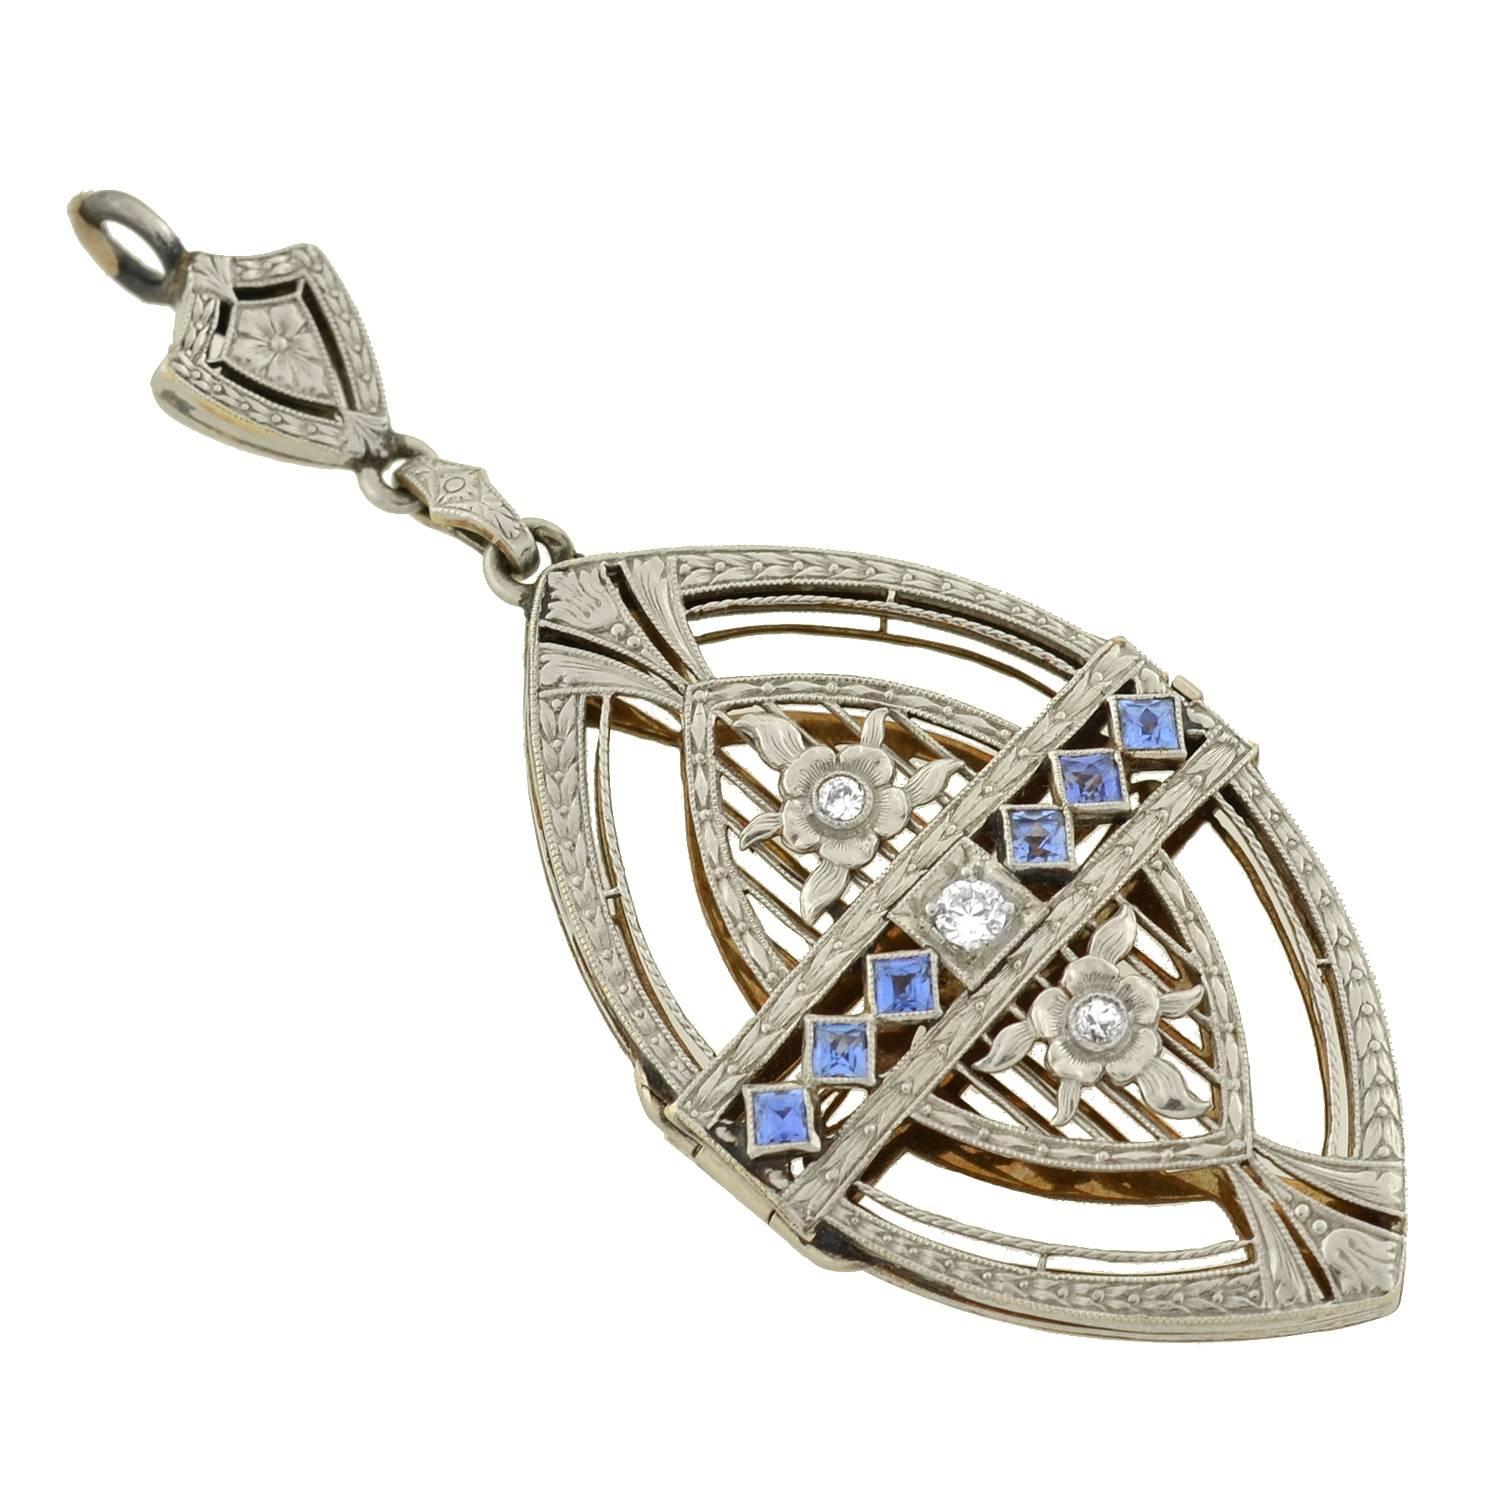 A unique and very unusual diamond and sapphire pendant from the Edwardian (ca1910) era! The pendant, which is made of platinum-topped 14kt yellow gold, has a shield-like shape and cage-like design. The entire piece is etched in a fabulous floral